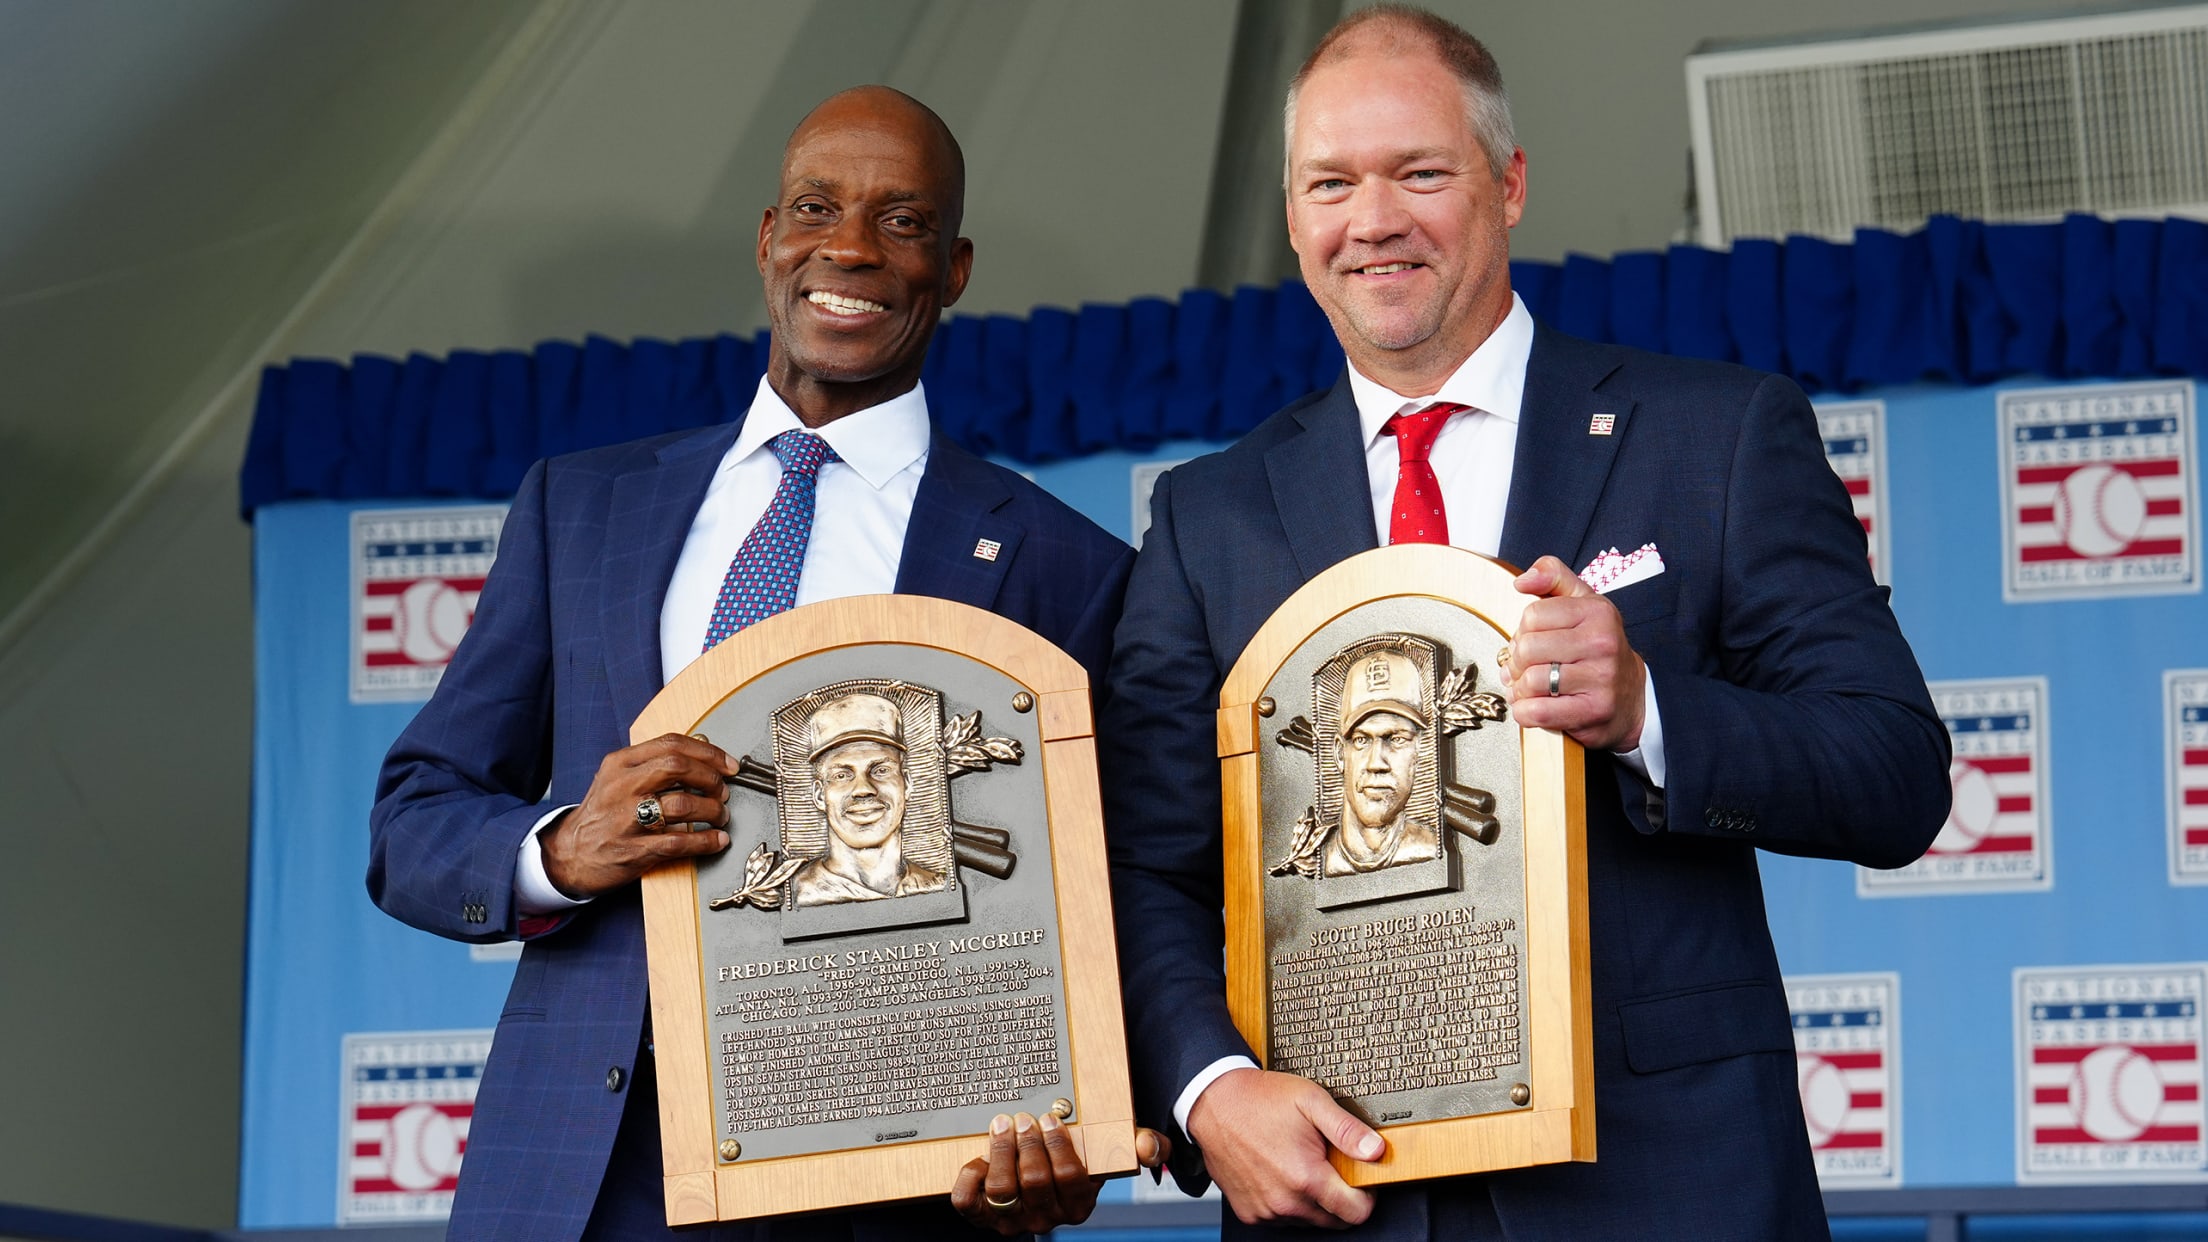 Rolen to enter Hall of Fame with Cardinals cap, McGriff opts for no logo